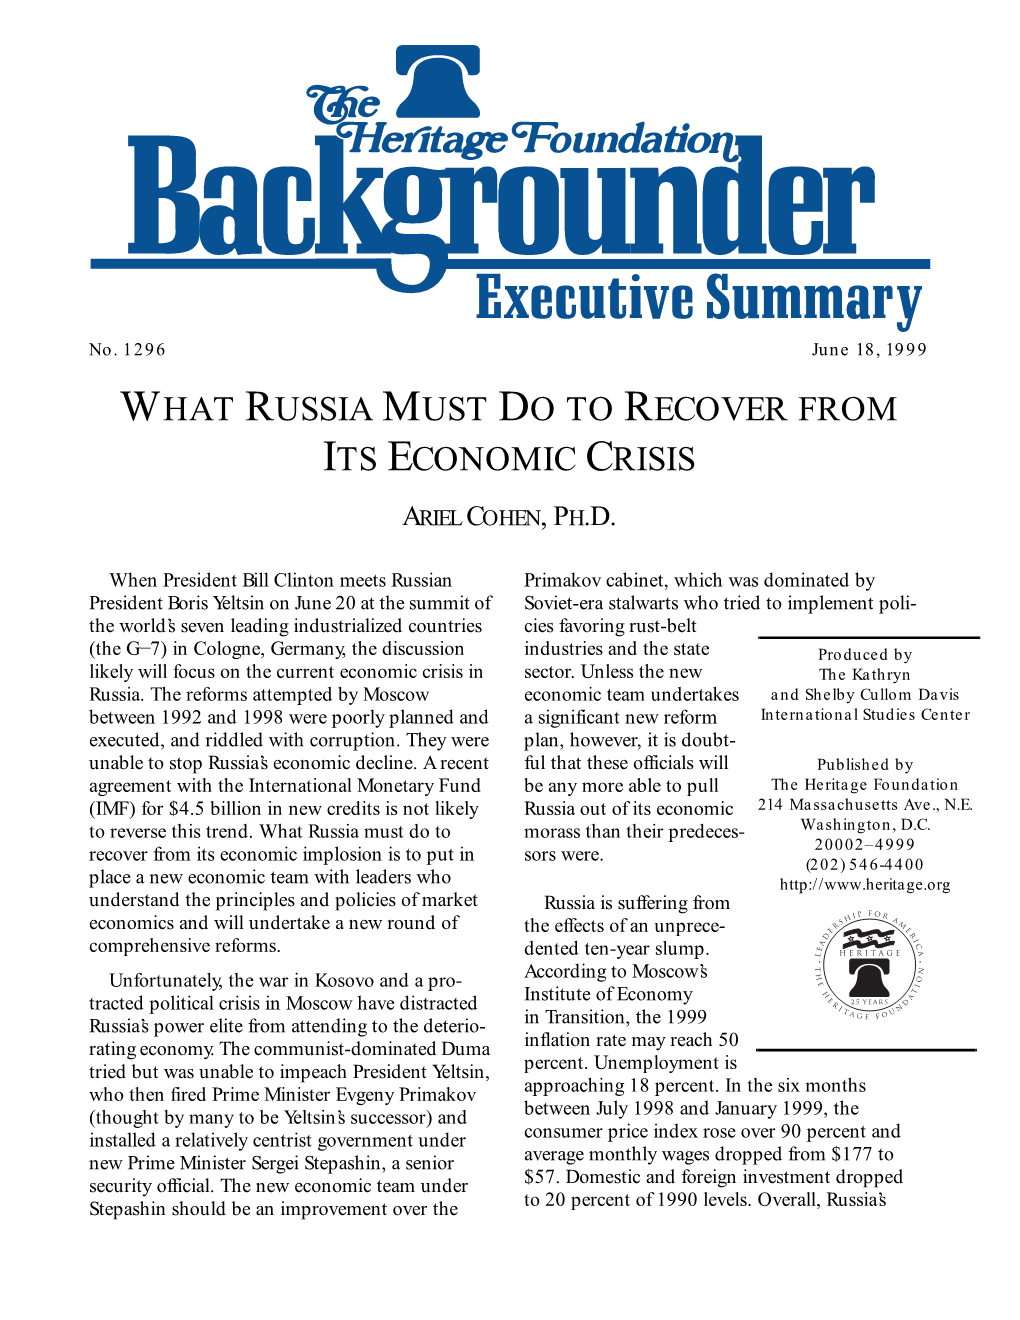 What Russia Must Do to Recover from Its Economic Crisis